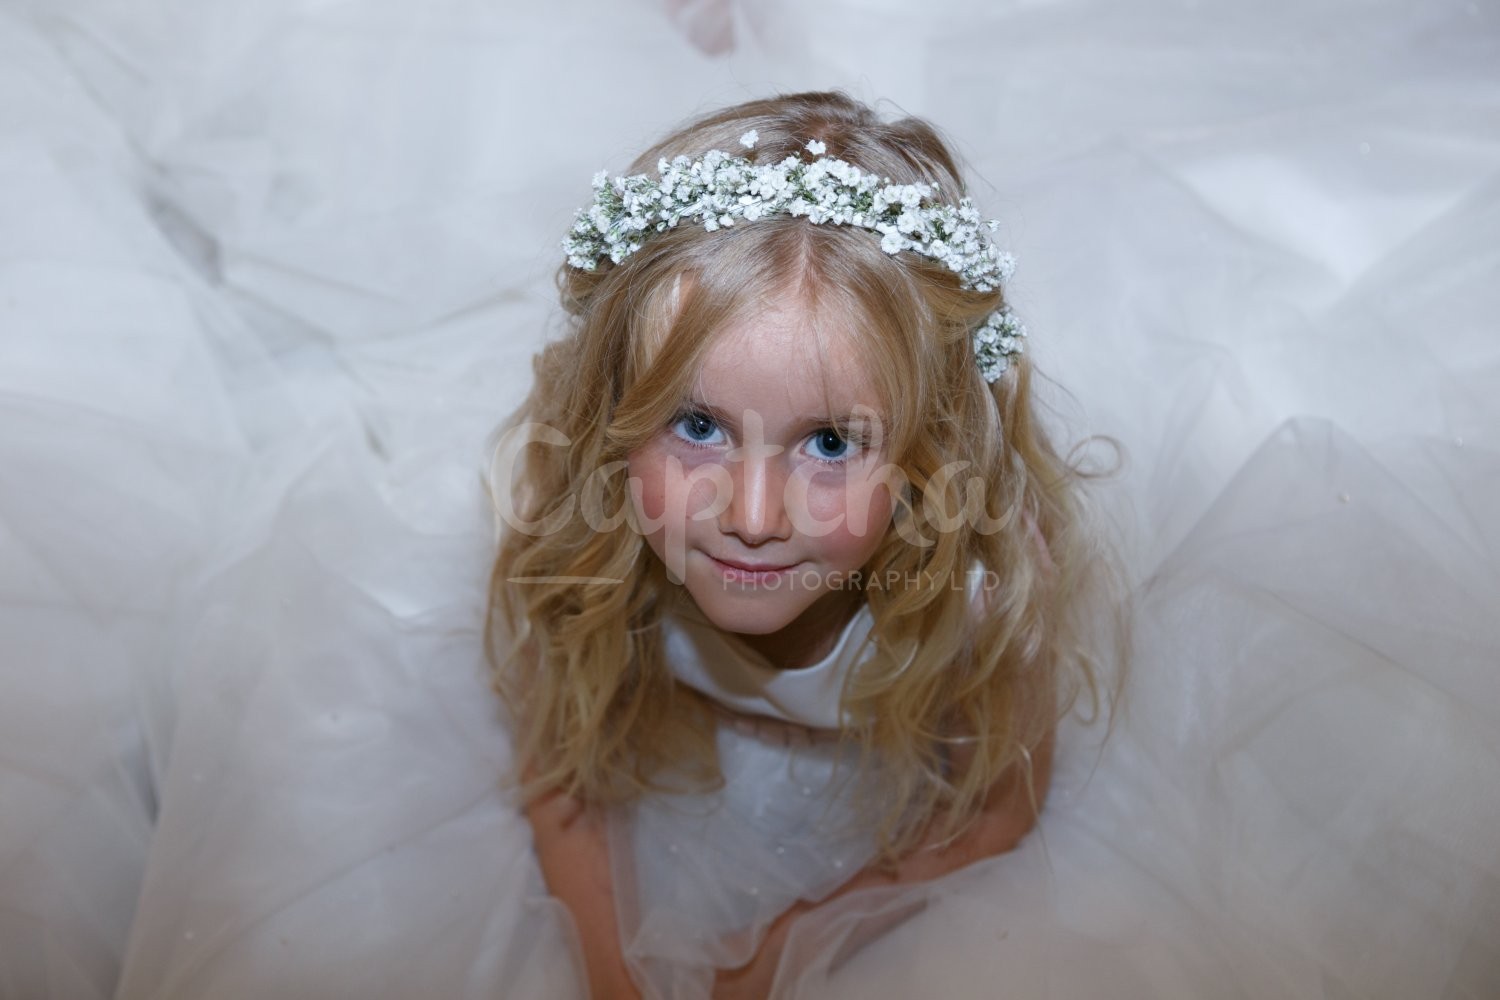 Its just as exciting as Christmas flowergirl, beautiful, flowers in hair, yew lodge hotel, captcha photography